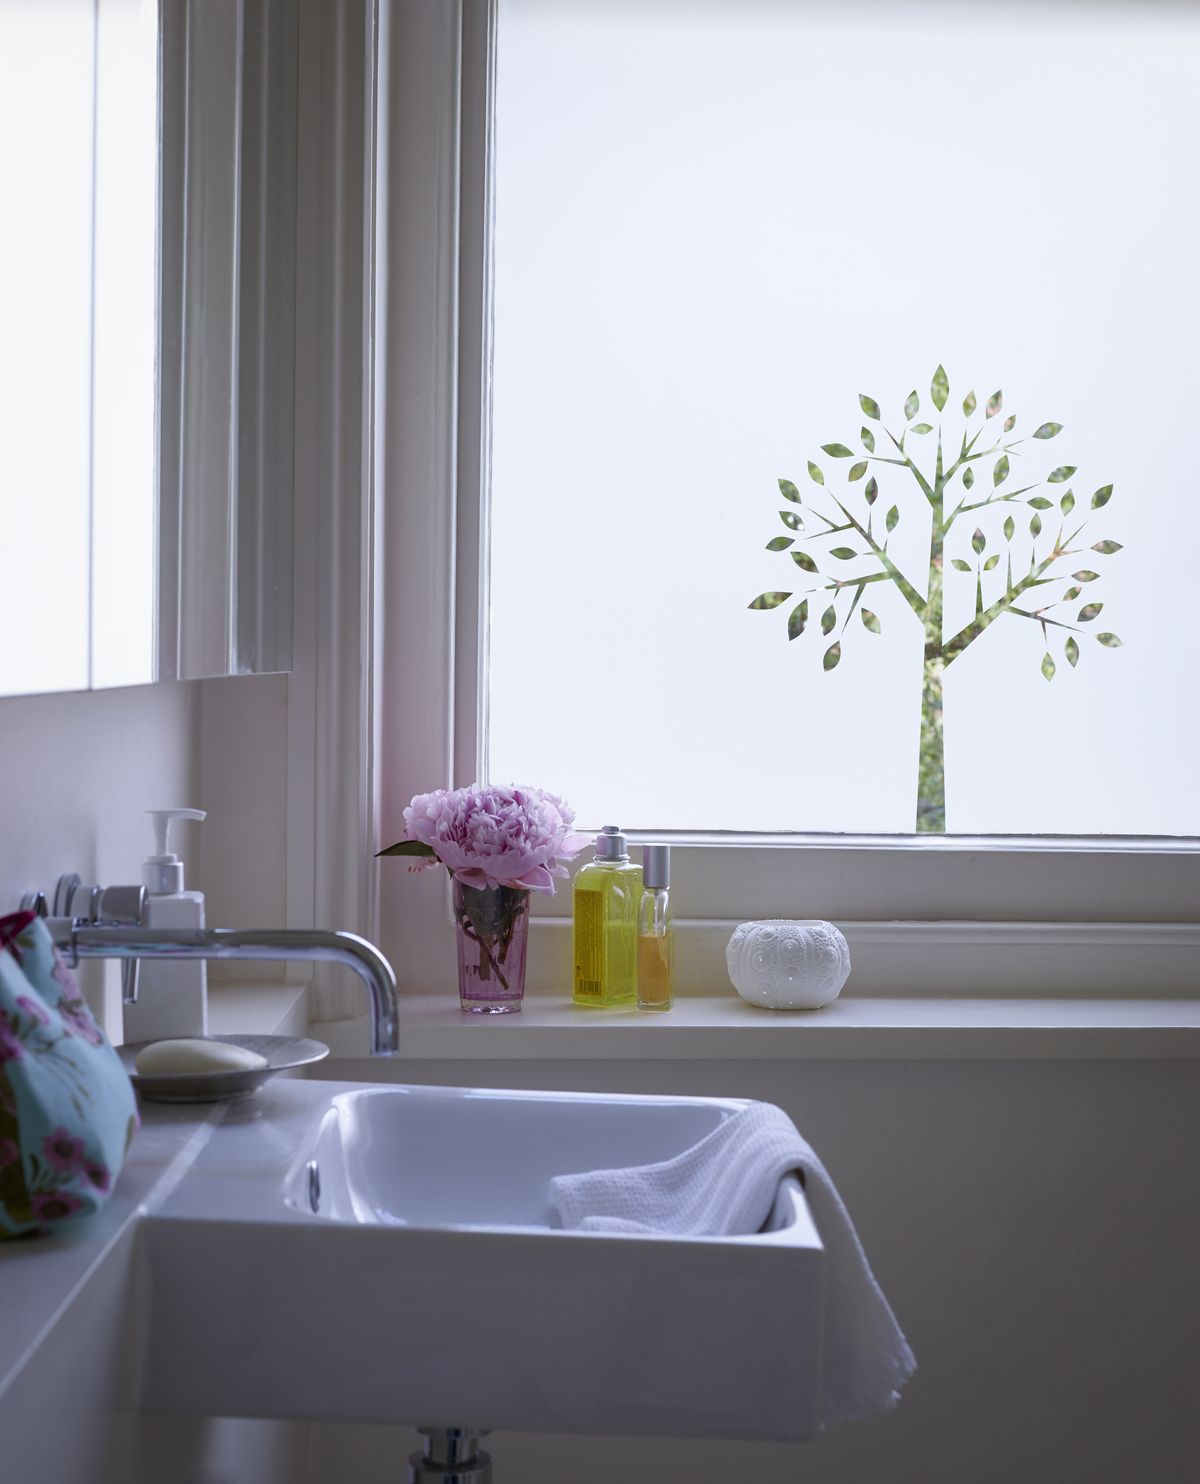 11 Bathroom Window Ideas You Ll Love From Roman Blinds To Colourful Shutters Real Homes